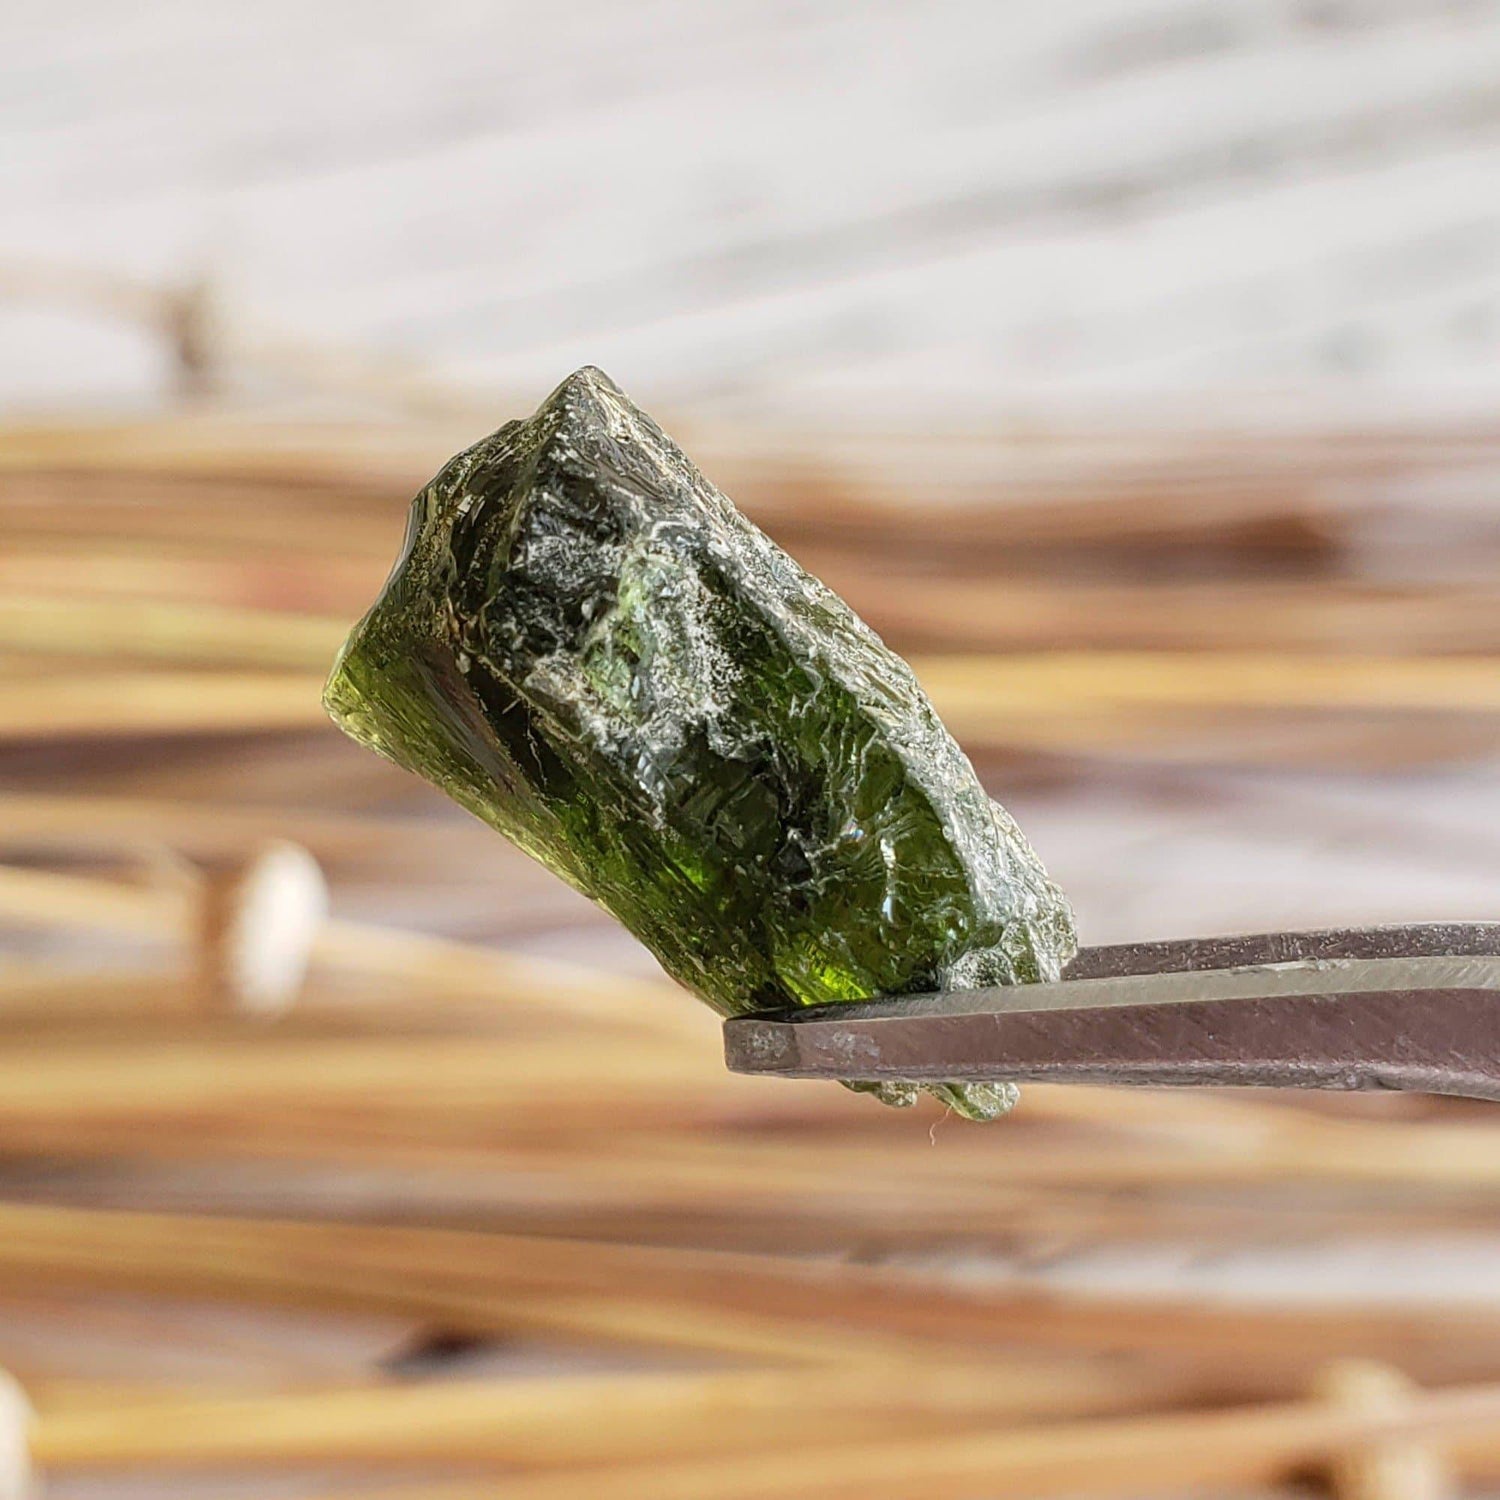 Chrome Diopside | Rough Crystal | Dark Green Mineral | 8.23ct | Africa